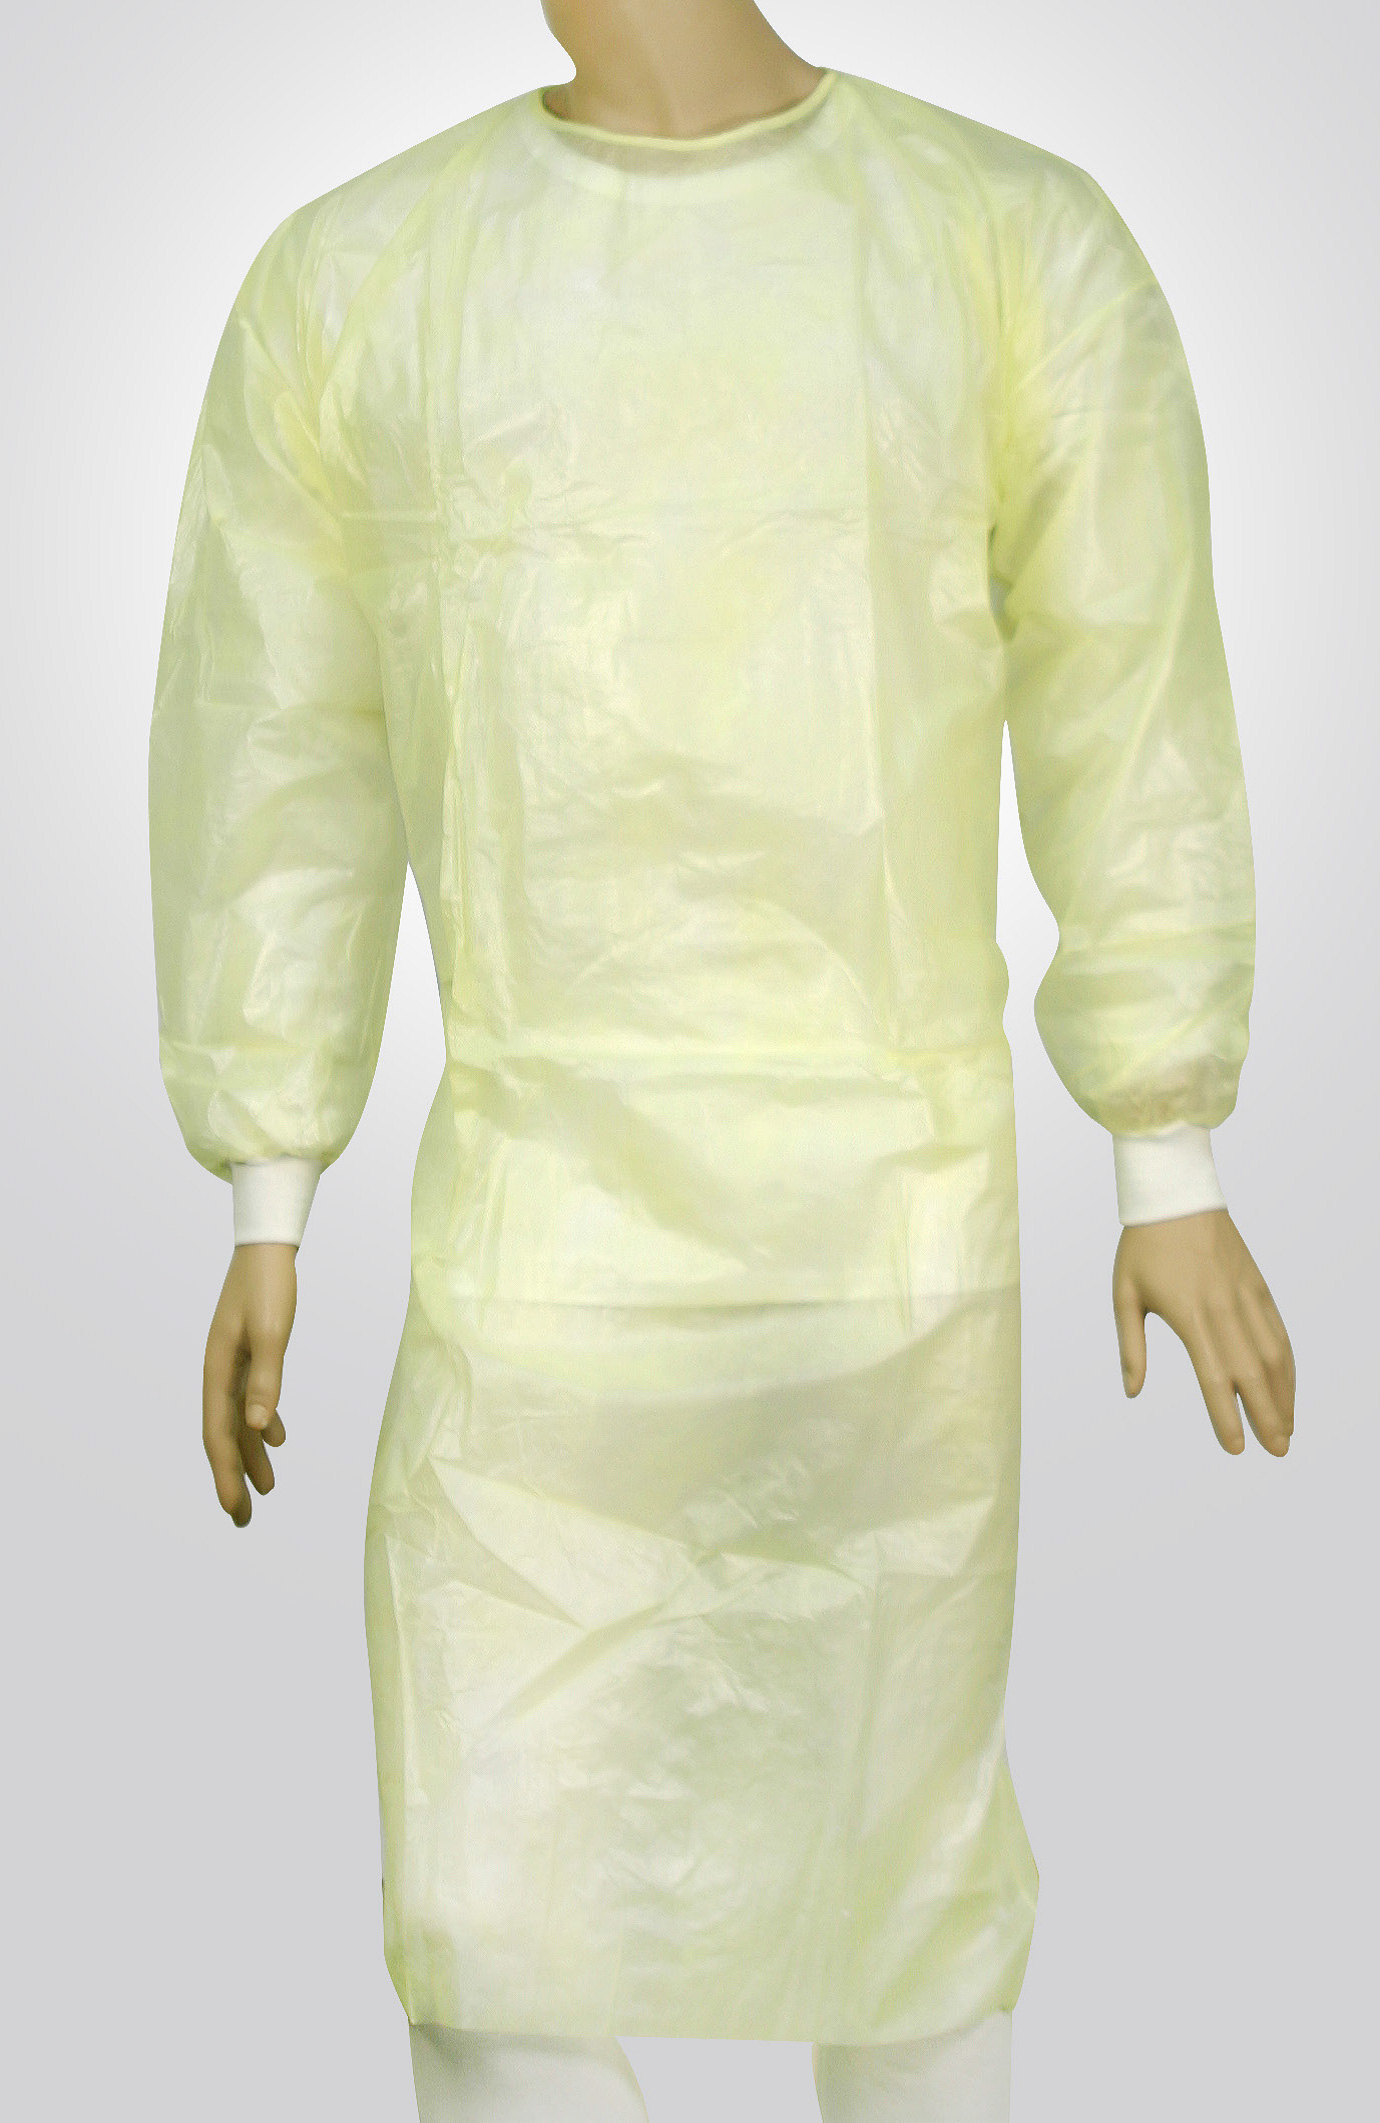 Safety Zone  Yellow Polypropylene Isolation Gown Ties  Technographic  Products